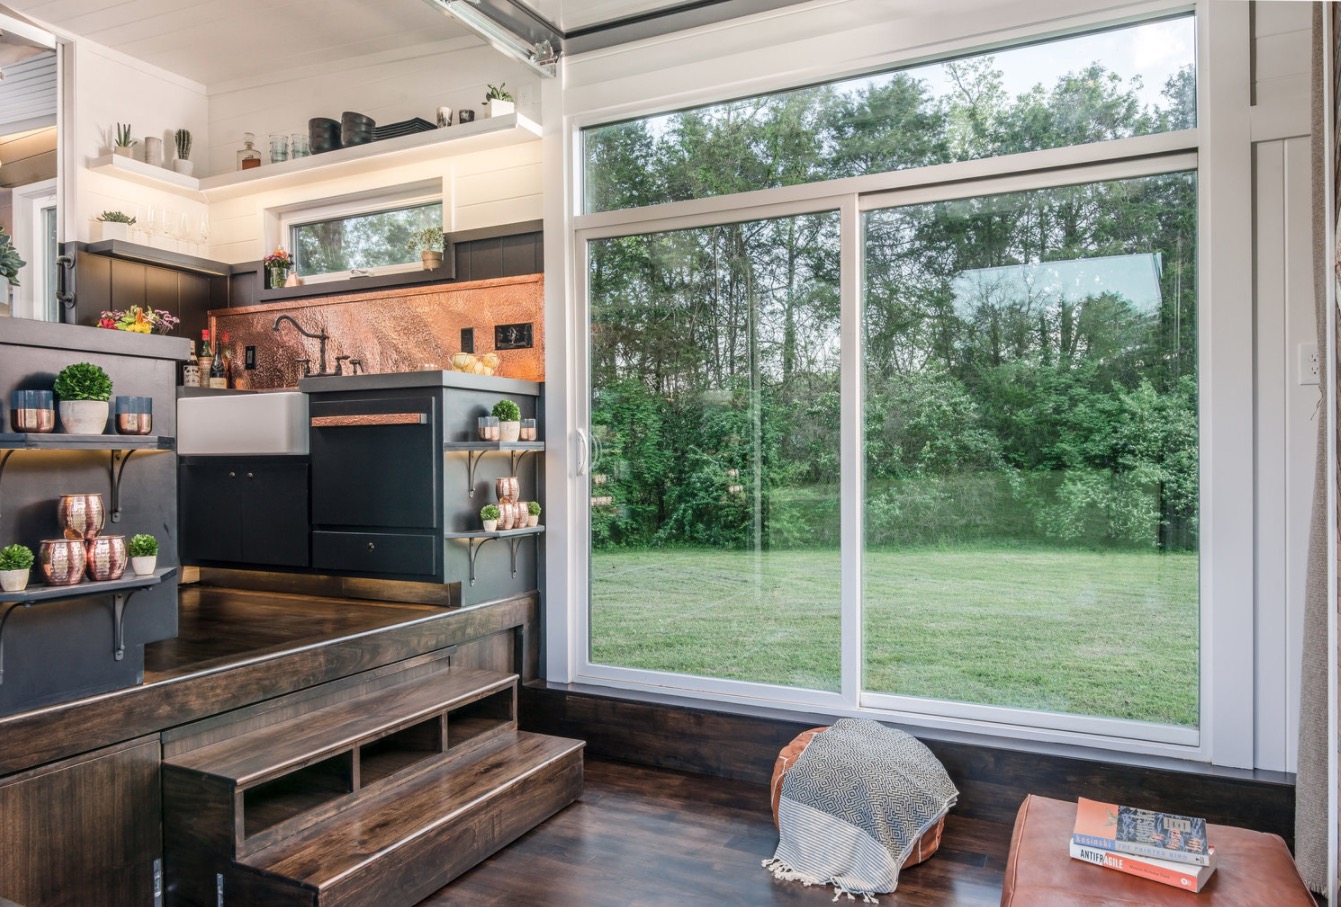 Family of Three's Incredible Tiny House